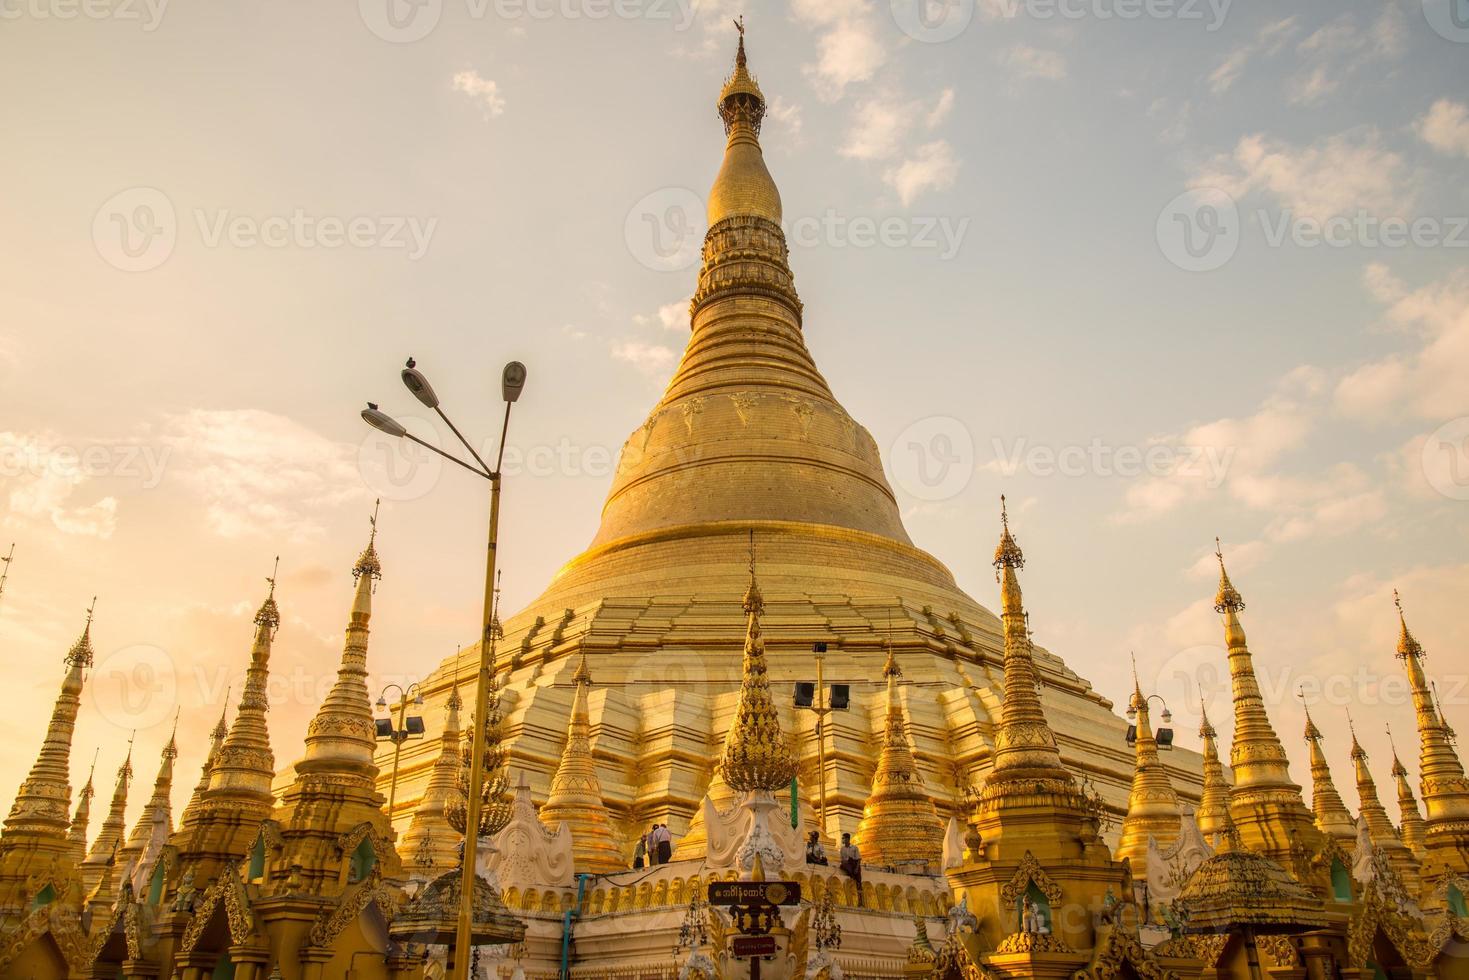 Shwedagon pagoda the most tourist attraction place in Yangon township of Myanmar during the sunset. photo